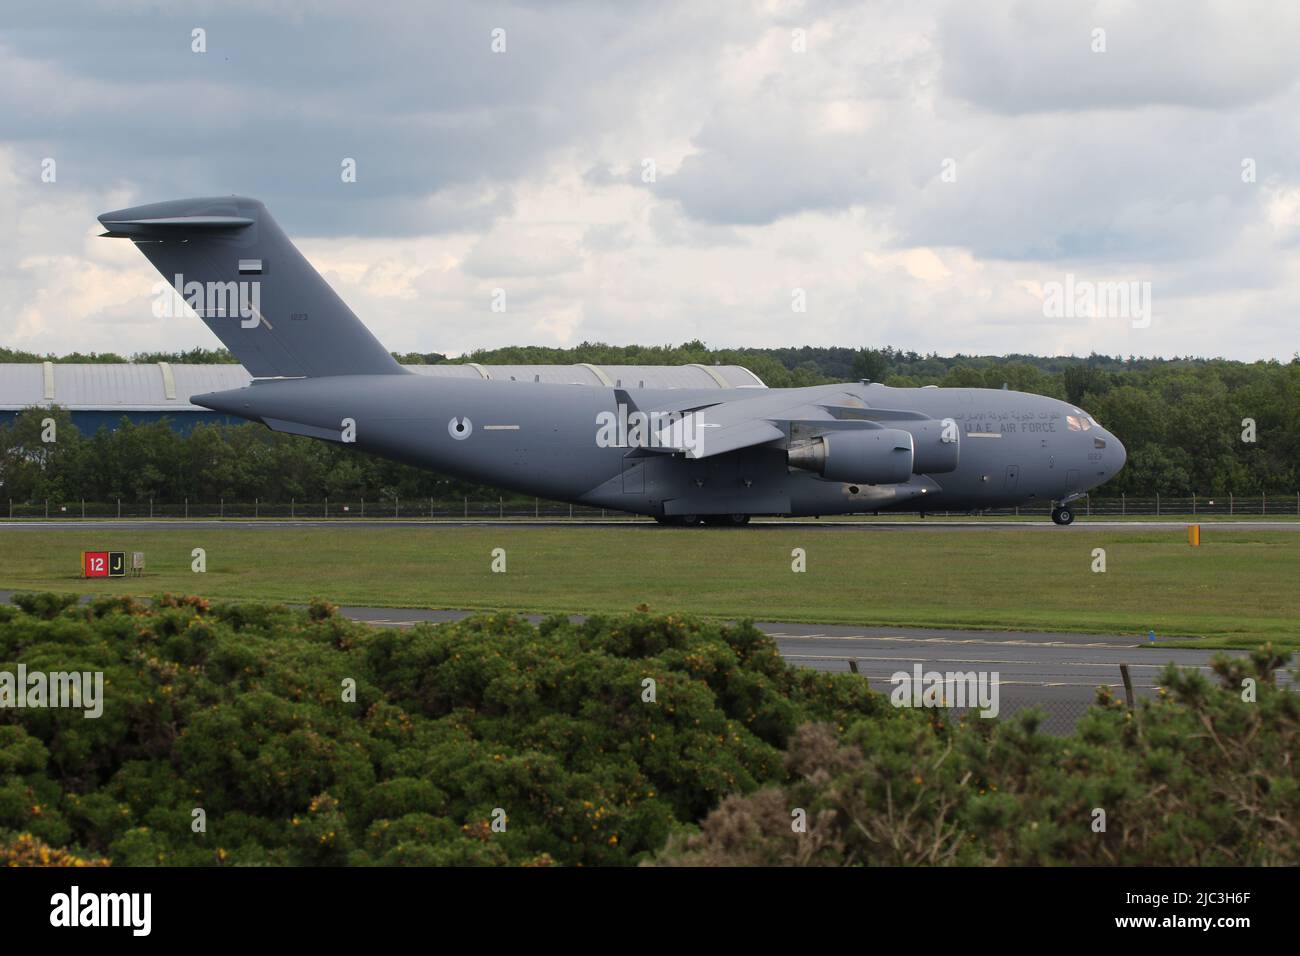 1223 (100401), a Boeing C-17 Globemaster III operated by the United Arab Emirates Air Force, about to depart from Prestwick International Airport in Ayrshire, Scotland. Stock Photo